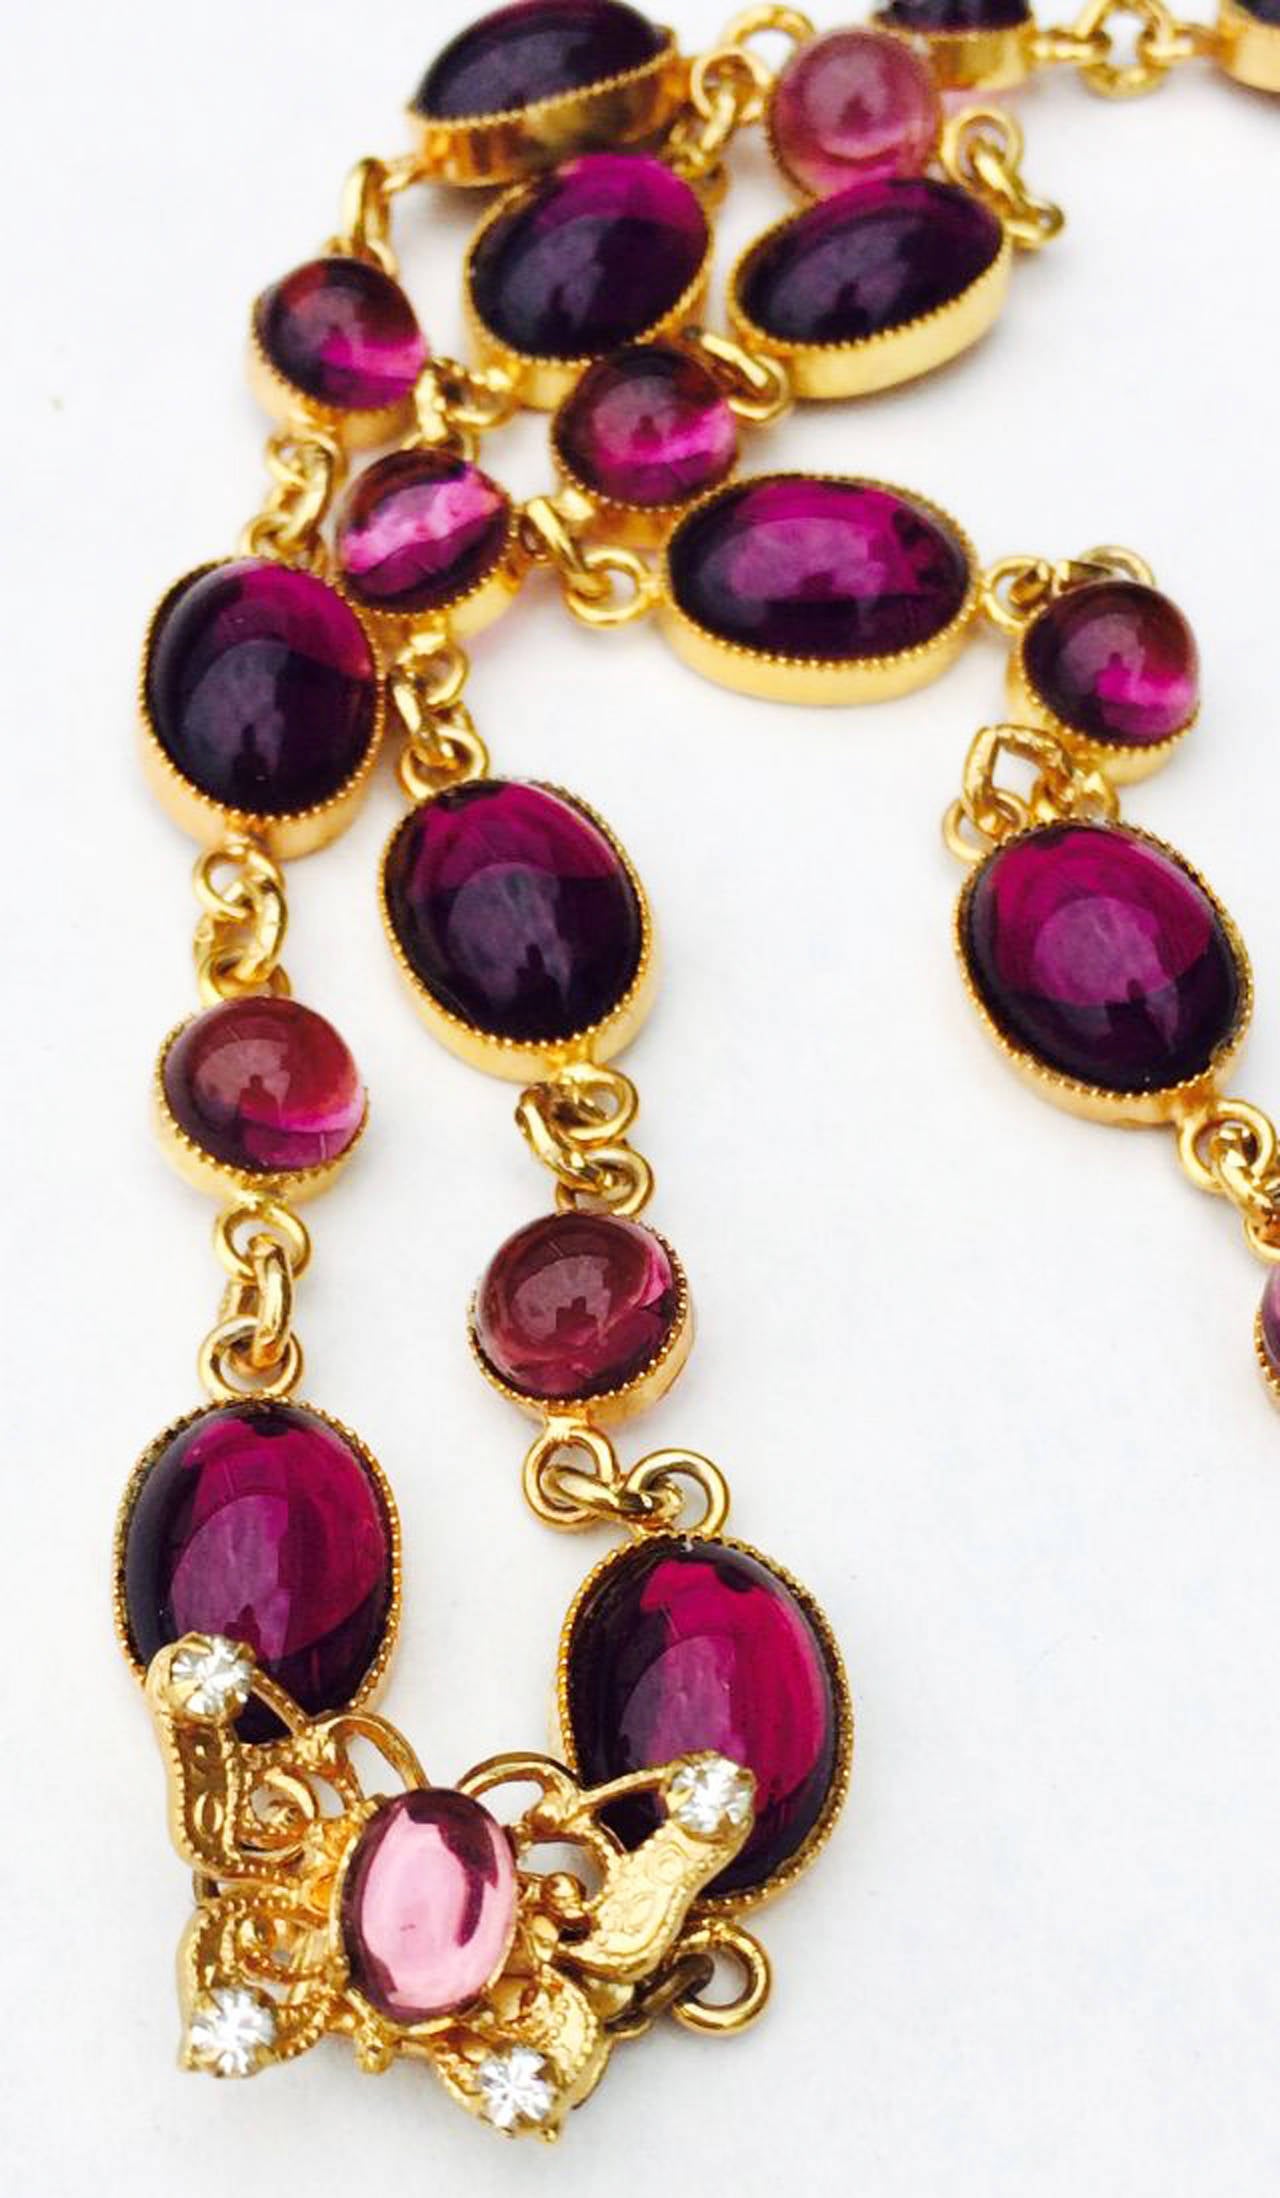 A fine and rare vintage William de Lillo pendant 'jeweled' pendant necklace. Signed gilt metal chain linked item suspends a matching 'jeweled' pendant. Swarovski crystals and both purple/pink glass cabochons set within gilt butterfly filigrees and